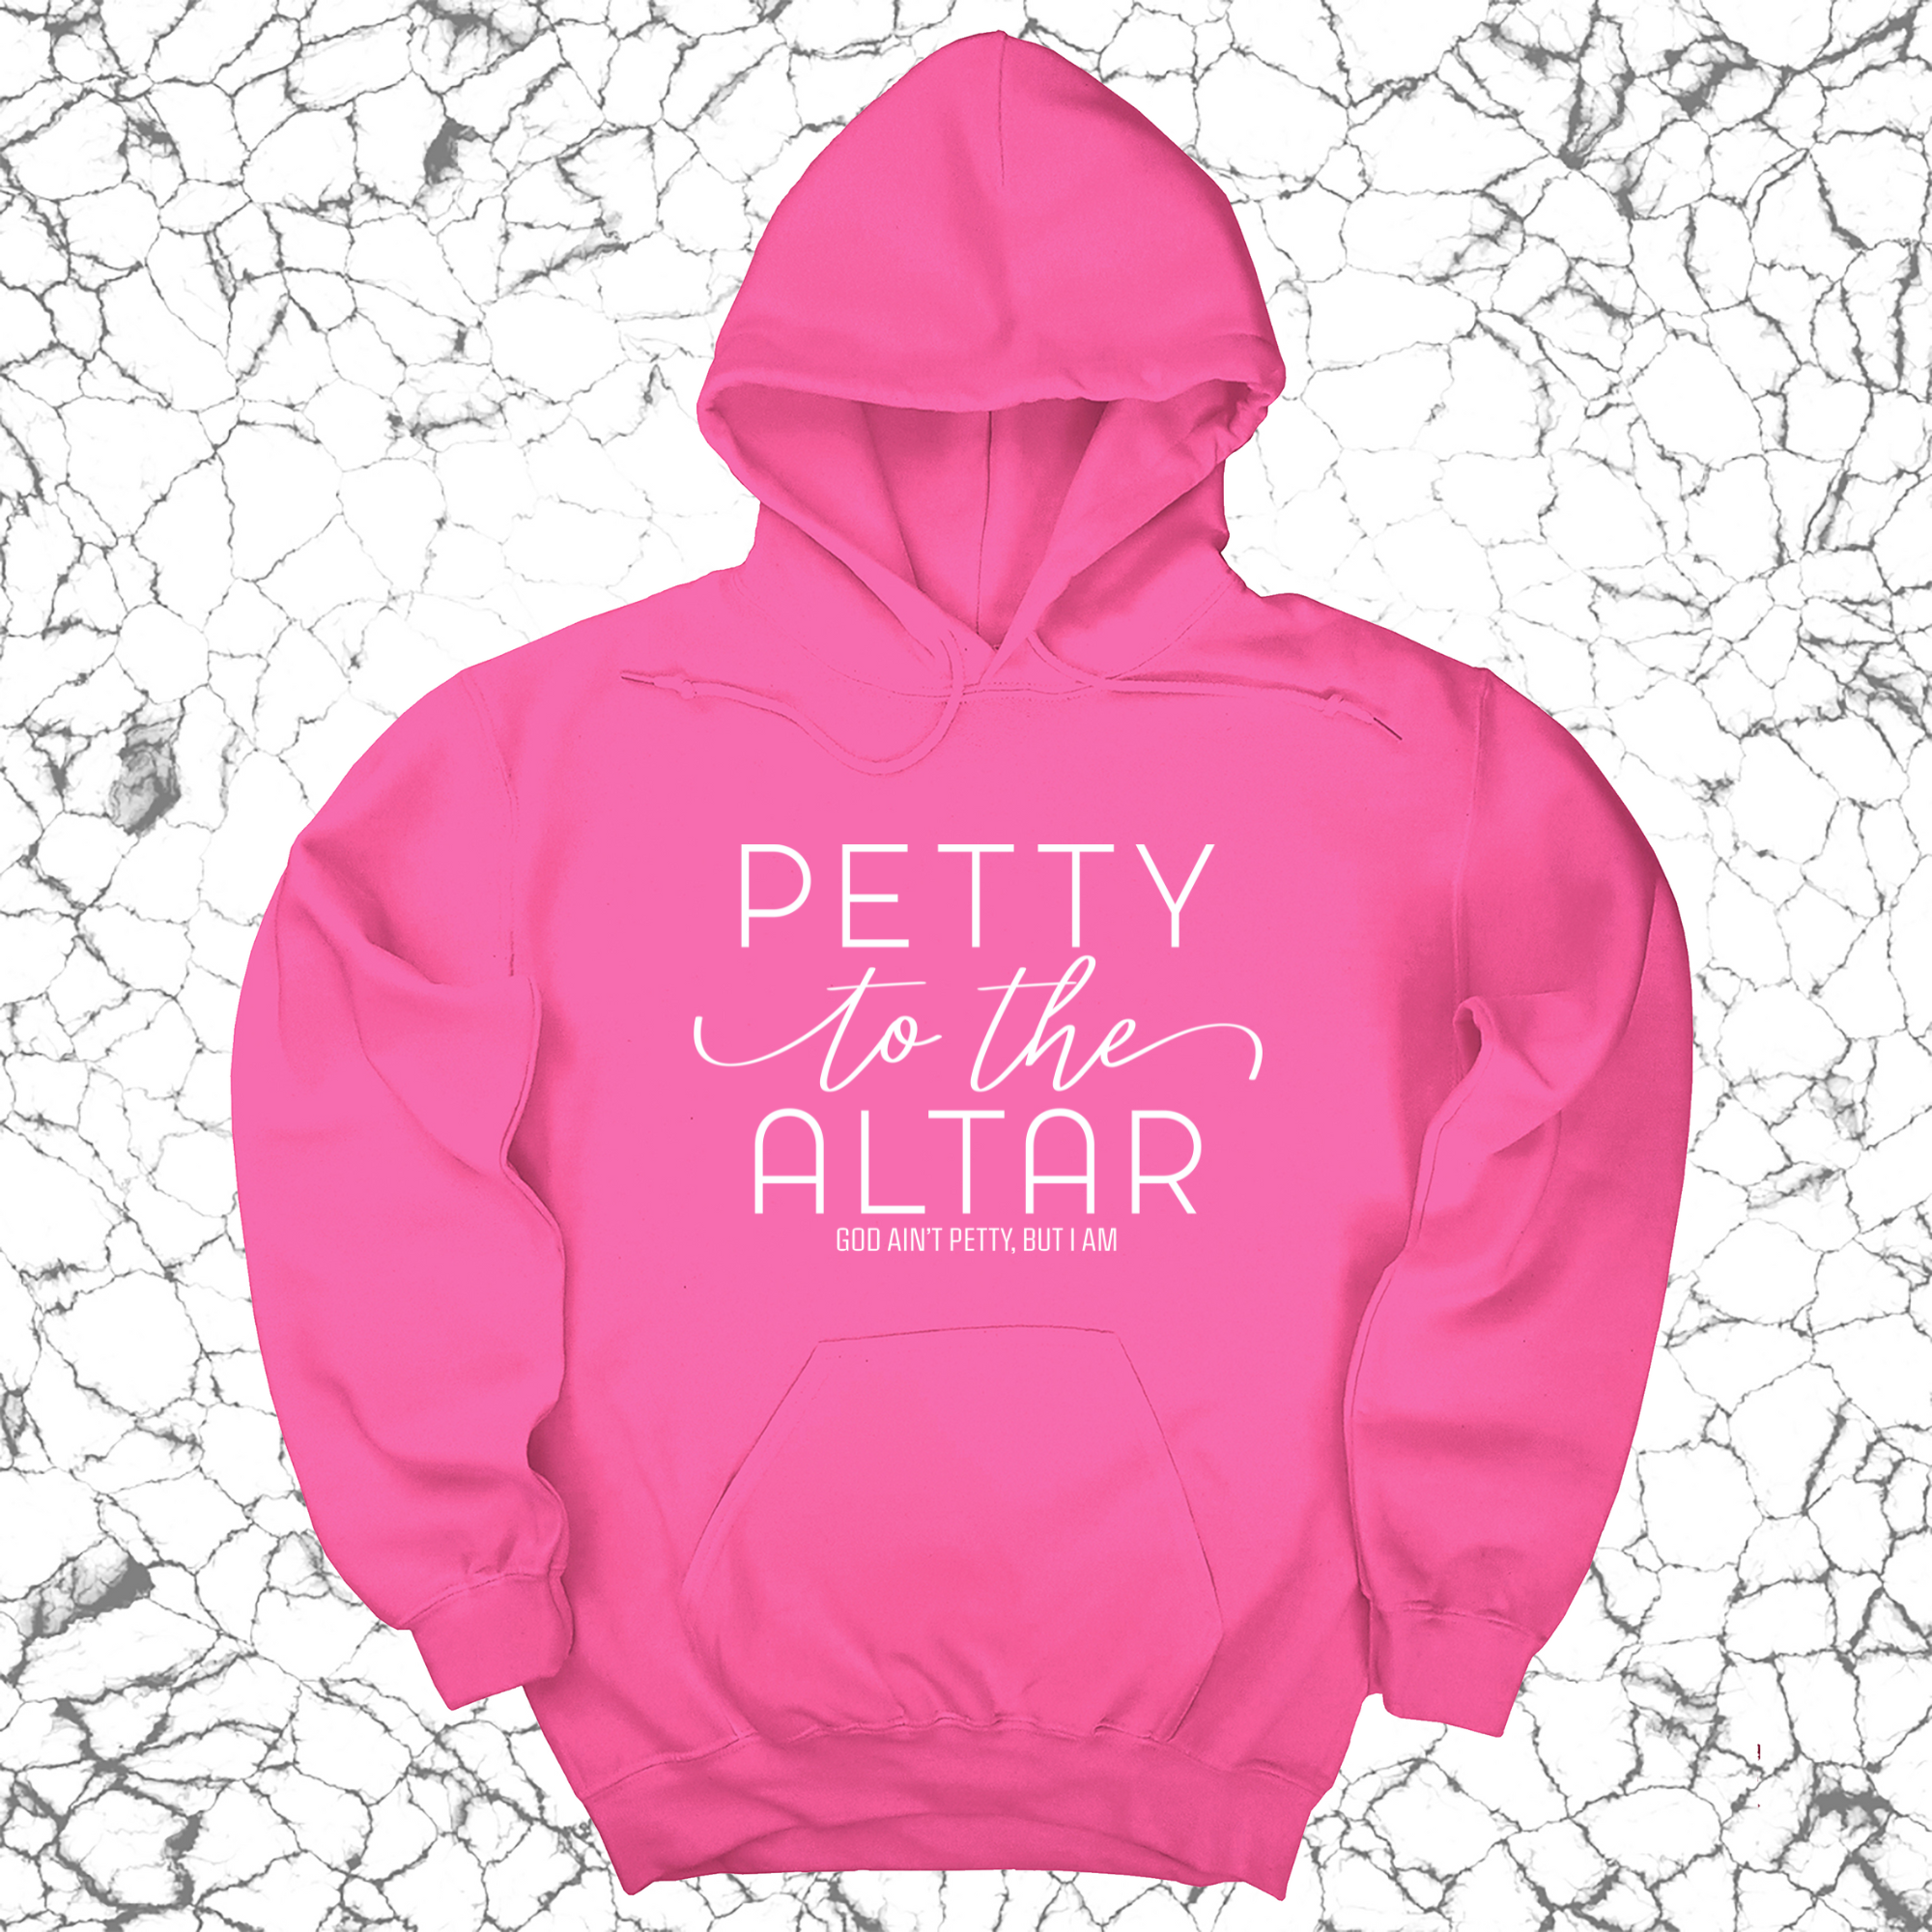 Petty to the Altar Unisex Hoodie-Hoodie-The Original God Ain't Petty But I Am